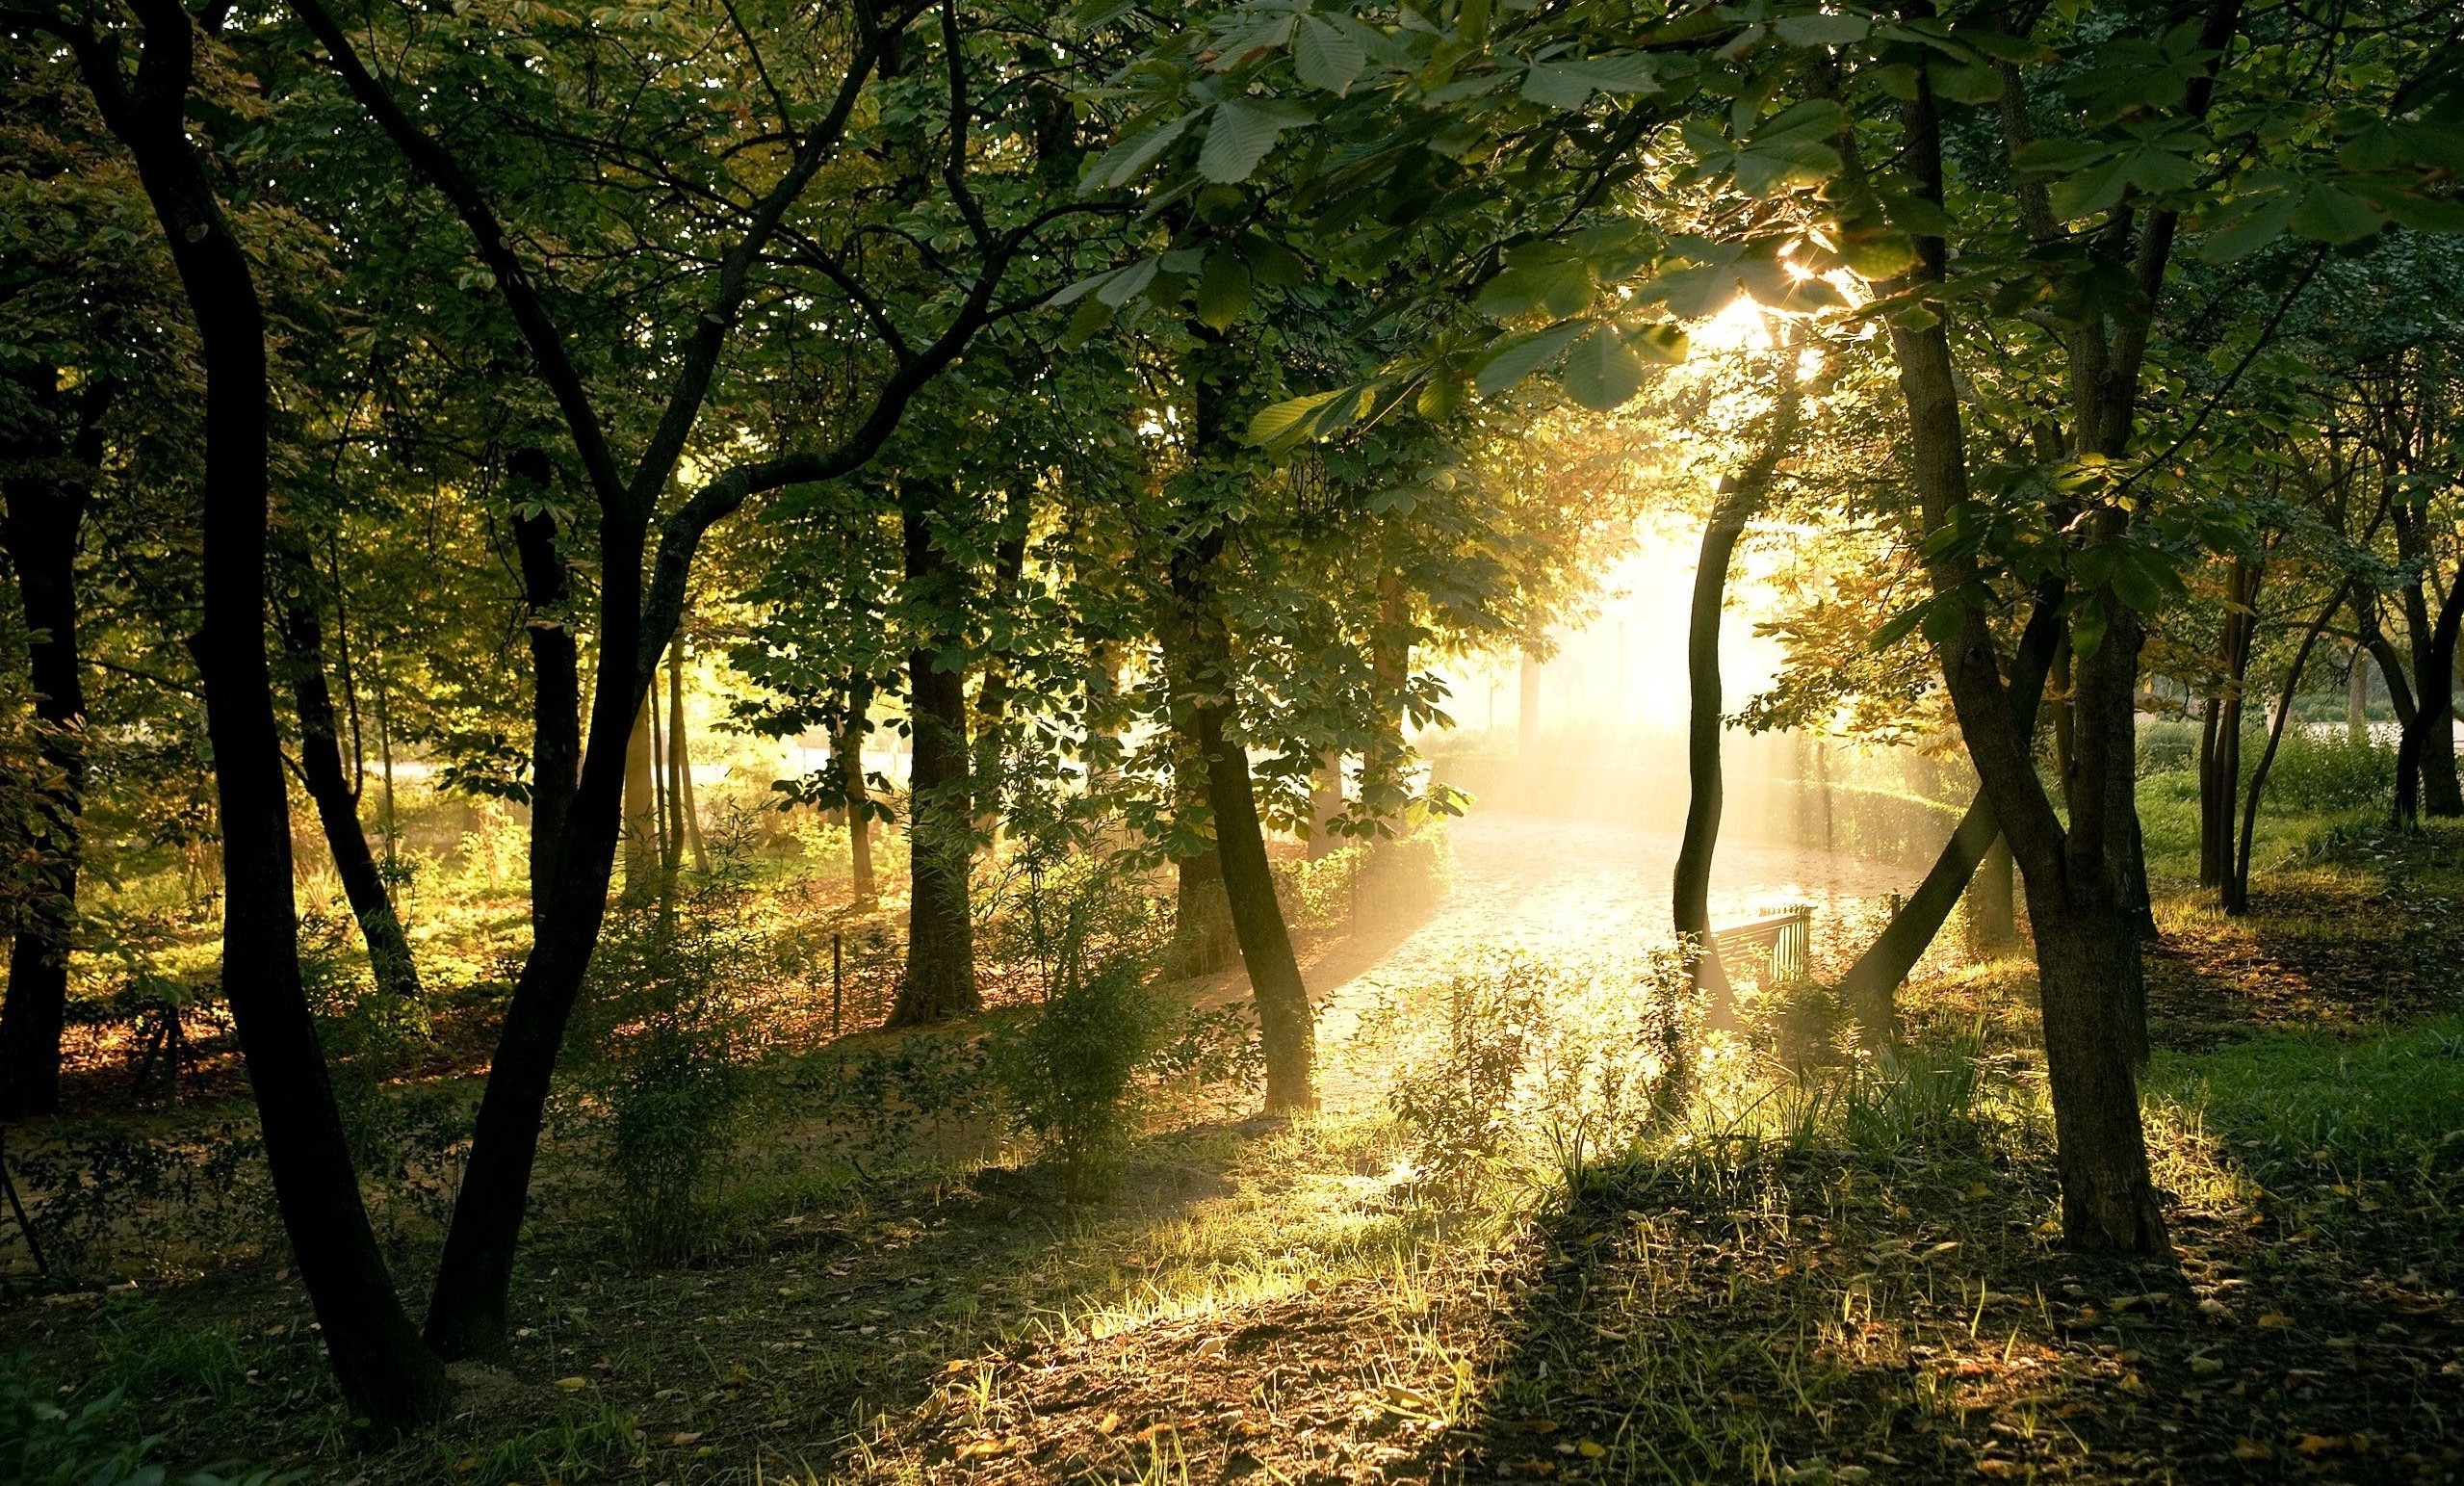 photography, Nature, Plants, Trees, Landscape, Sun Rays, Forest, Summer